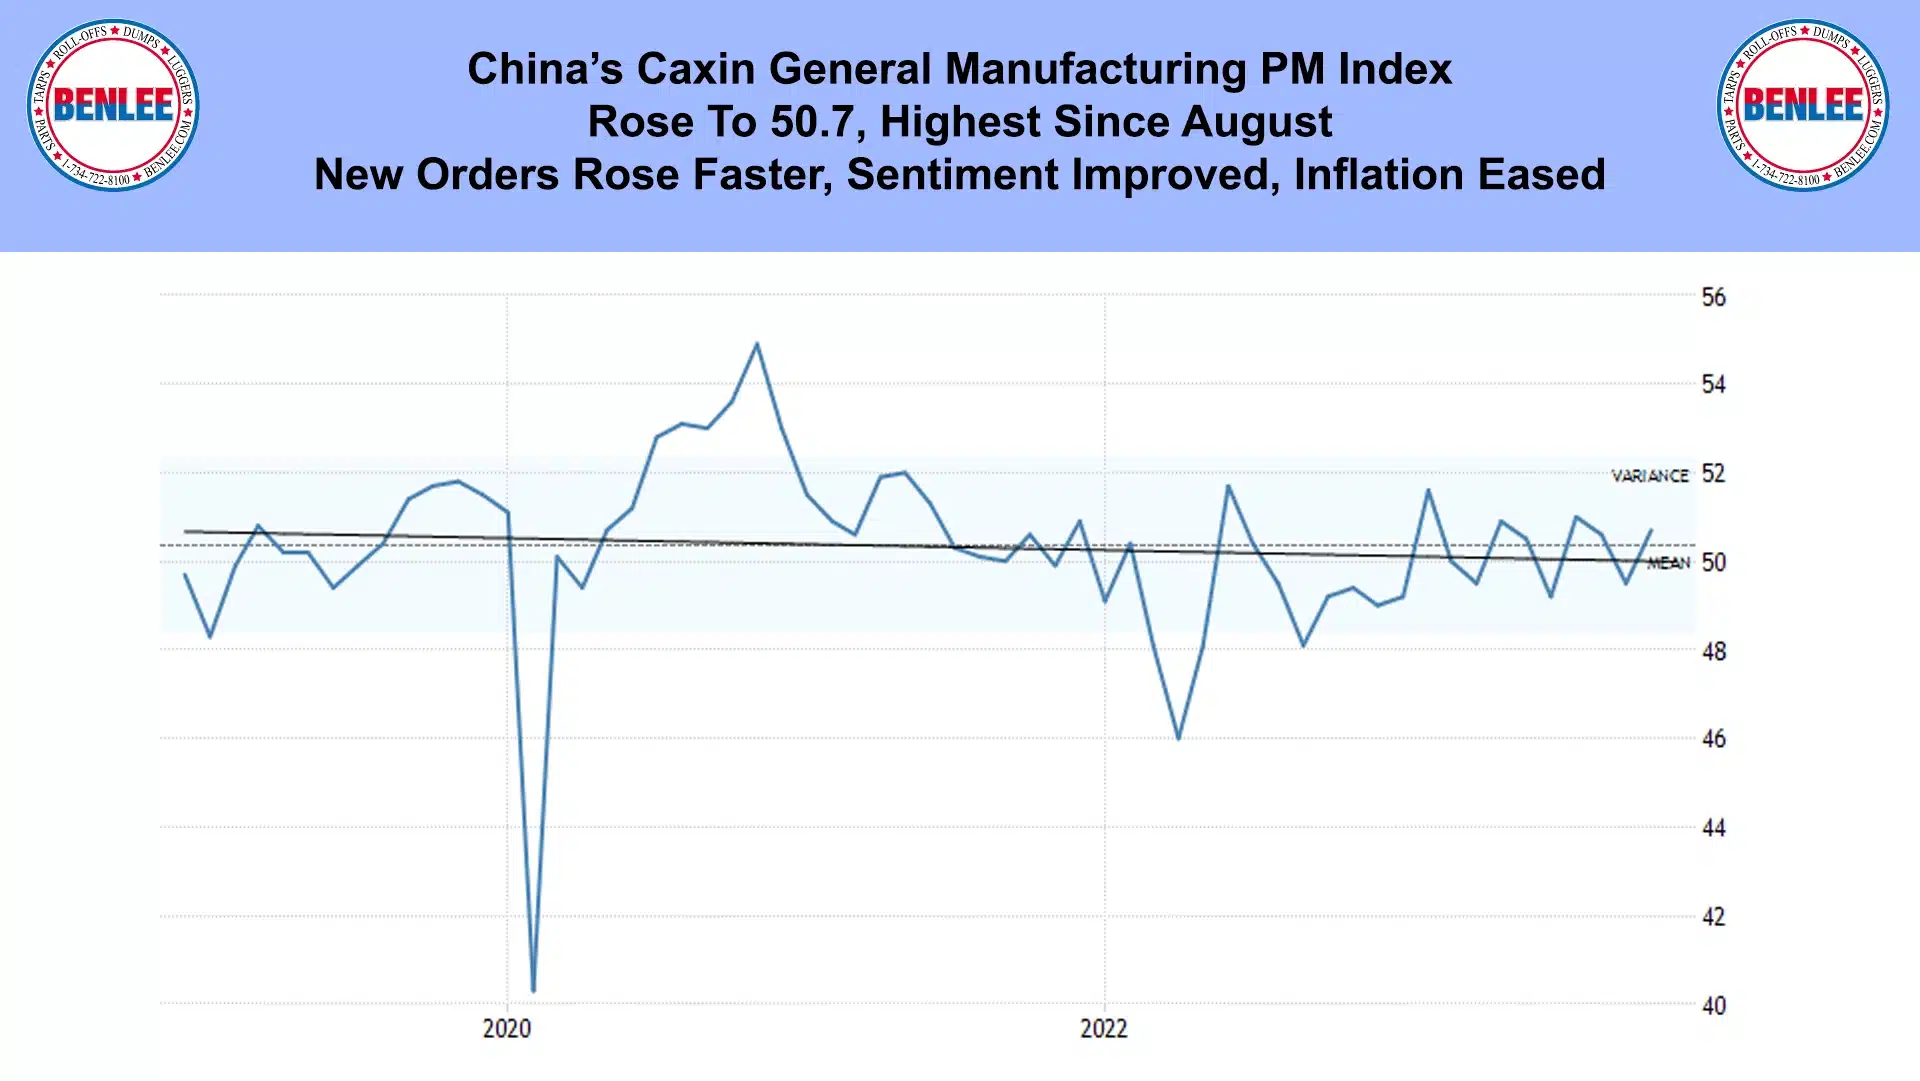 China's Caxin General Manufacturing PM Index